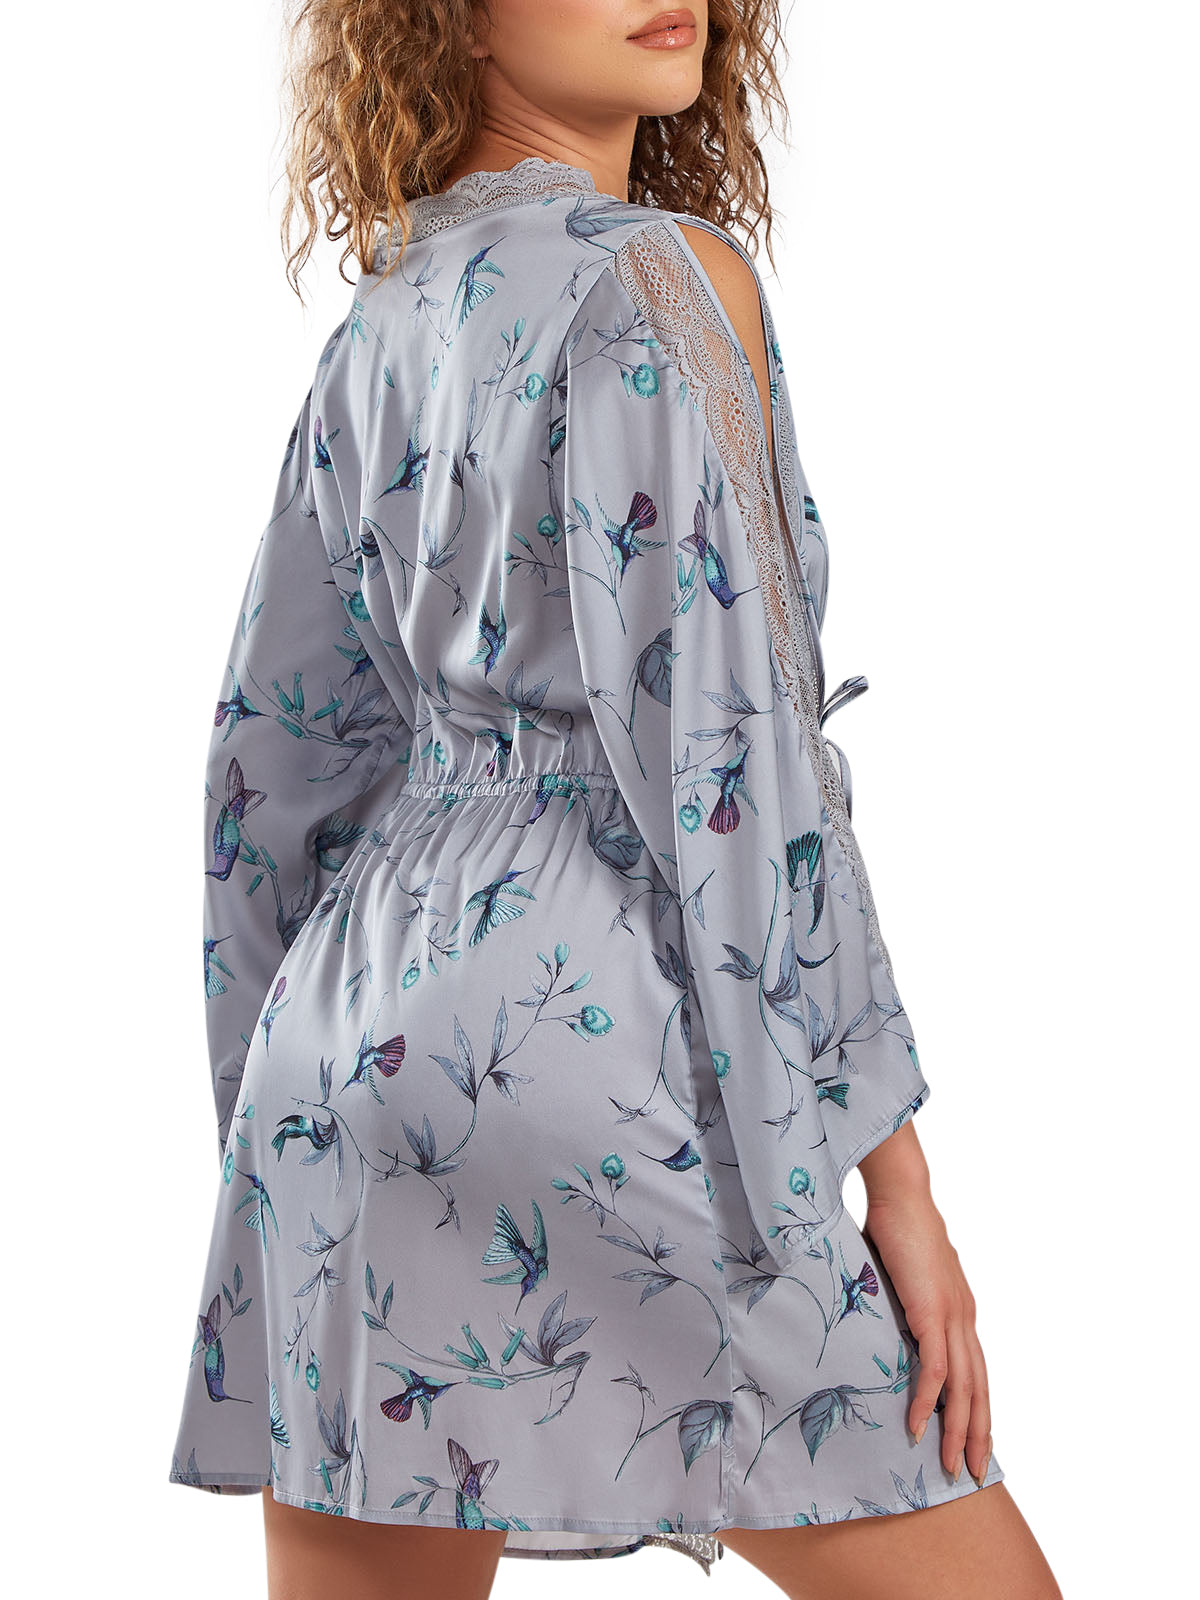 iCollection Ivy Robe